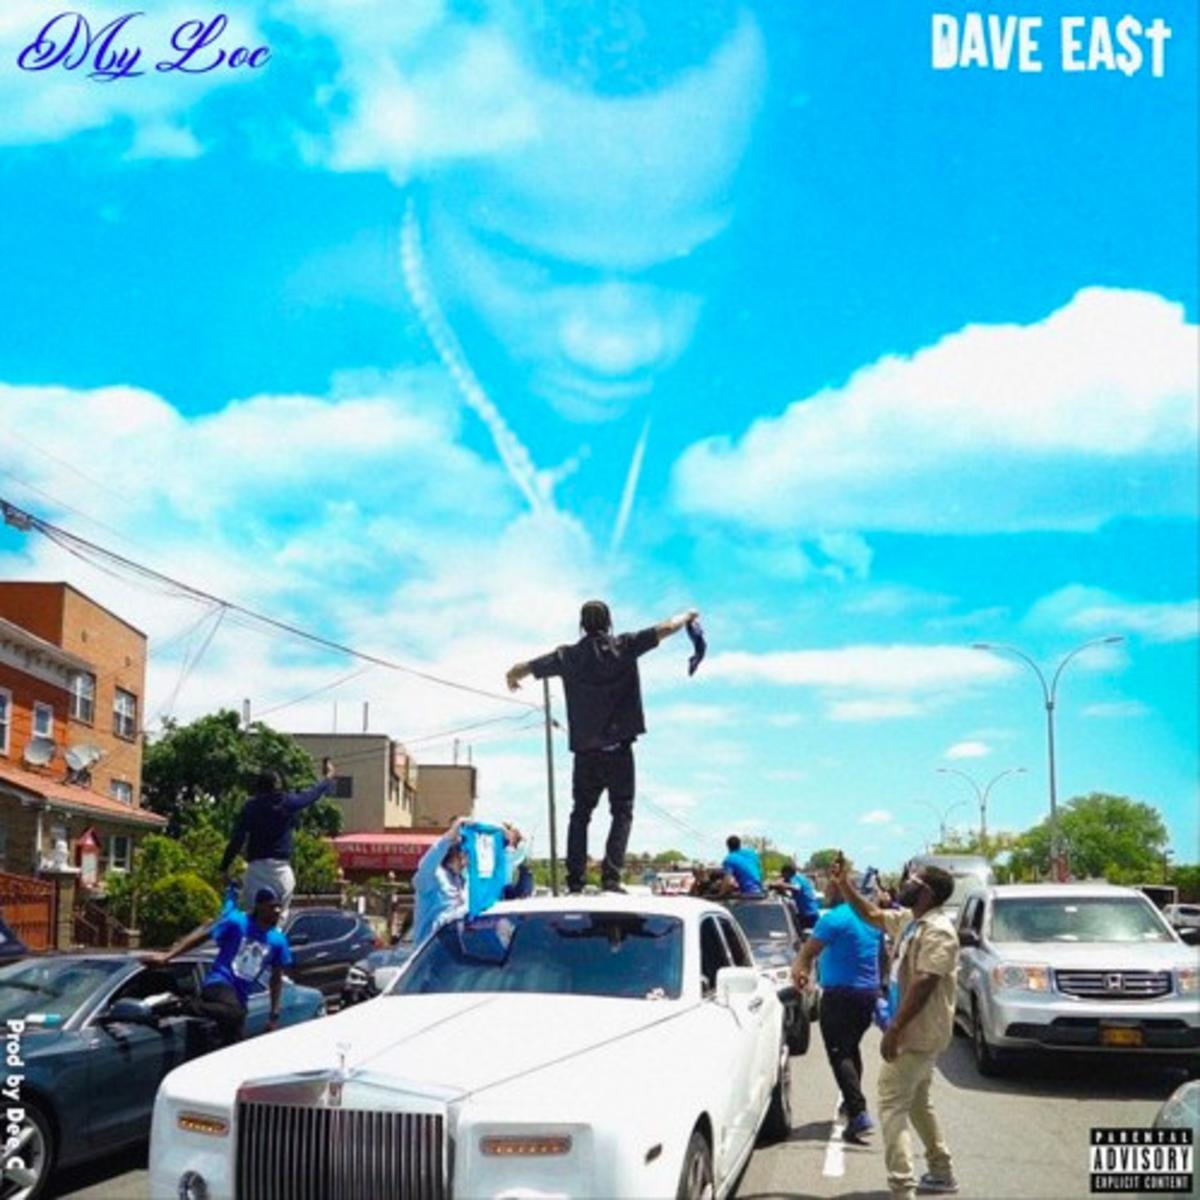 Dave East - My Loc 1